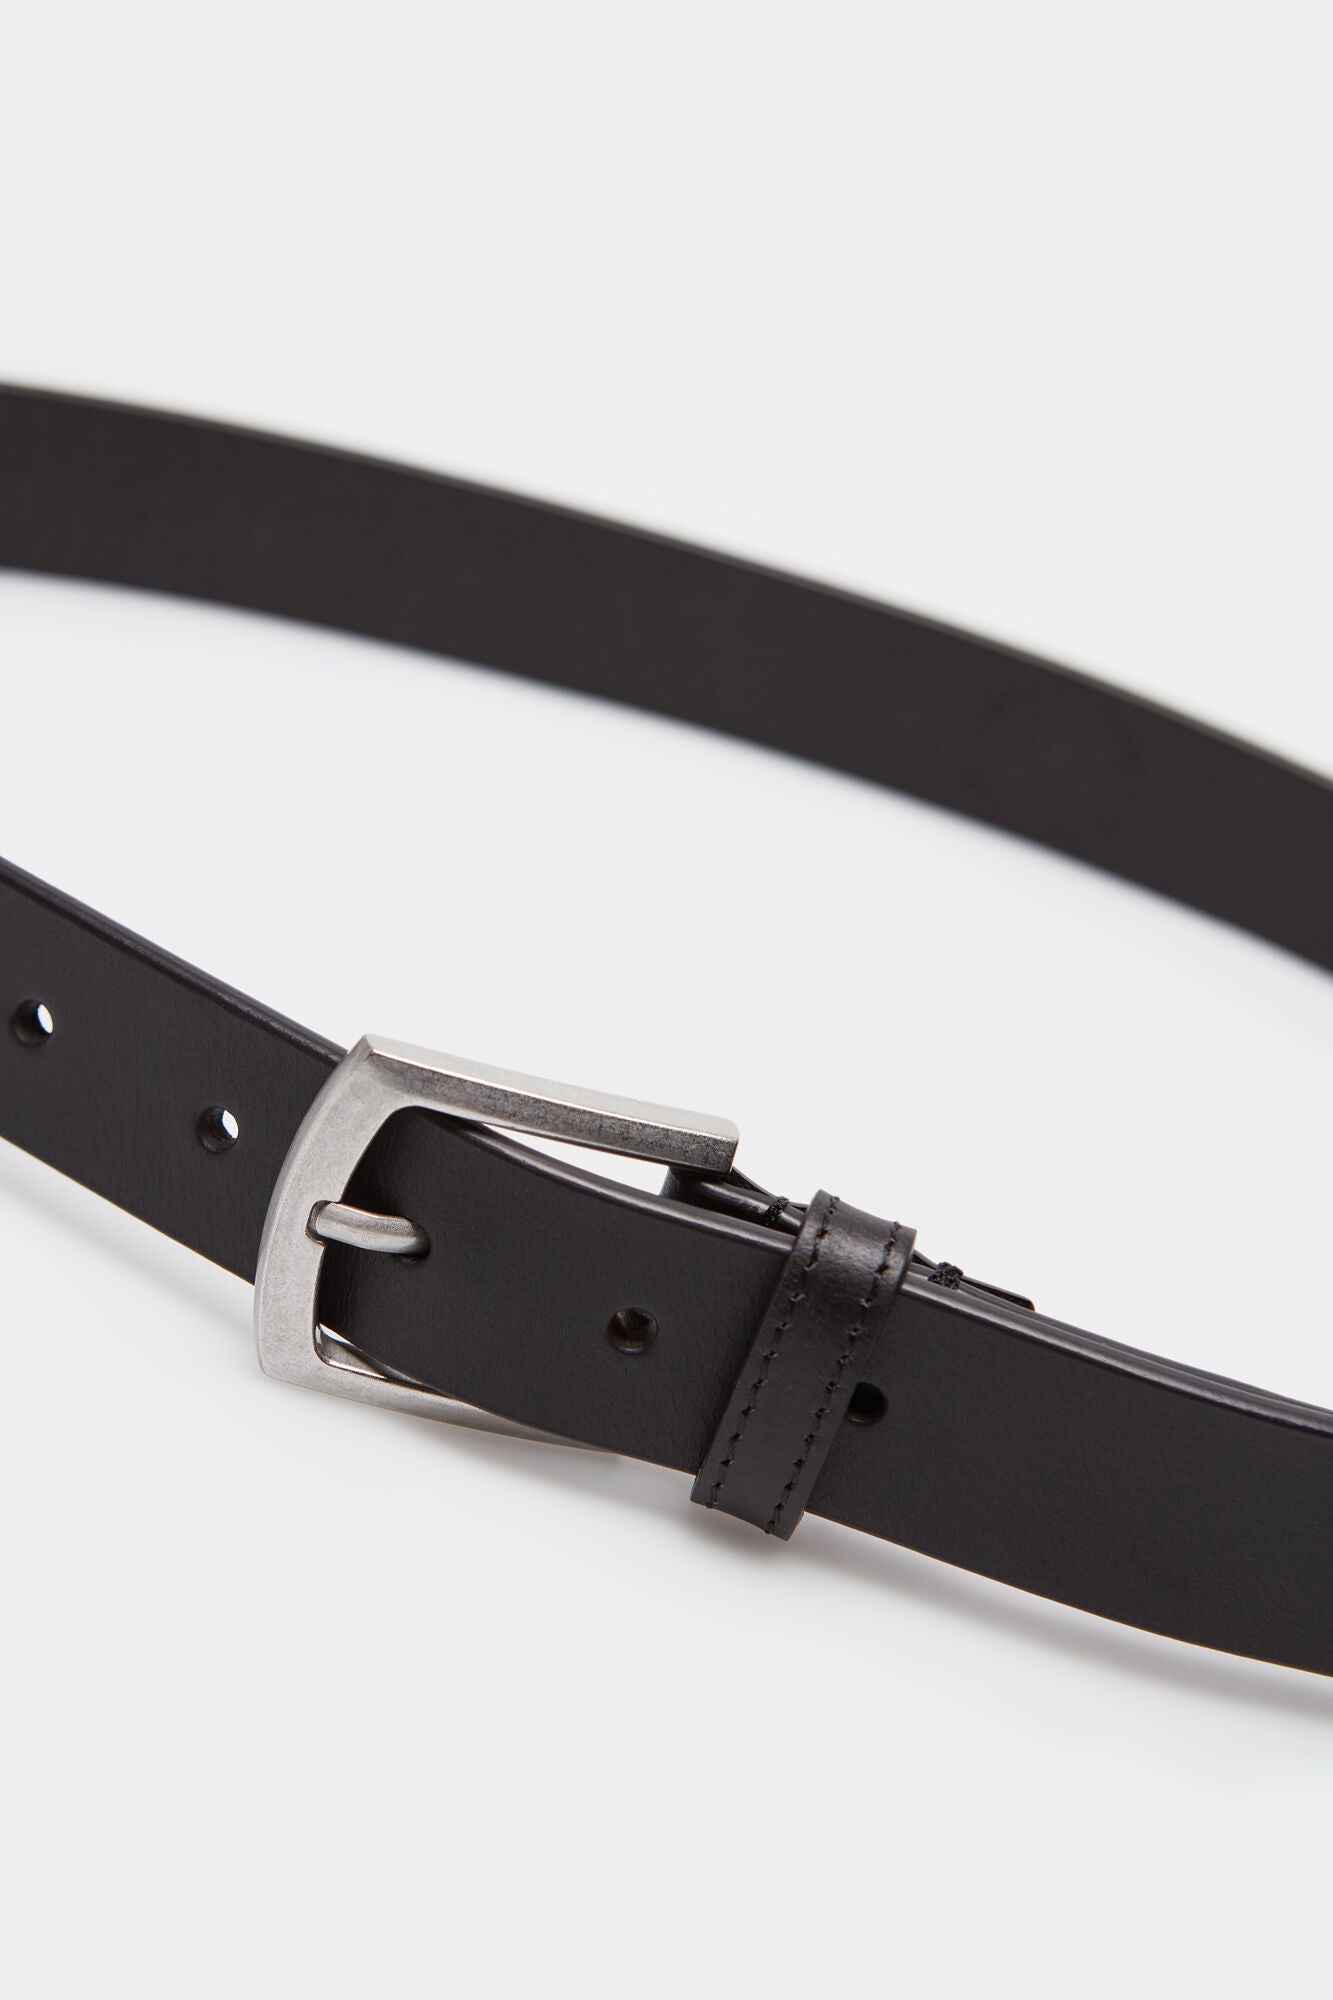 Faux leather belt with stitching